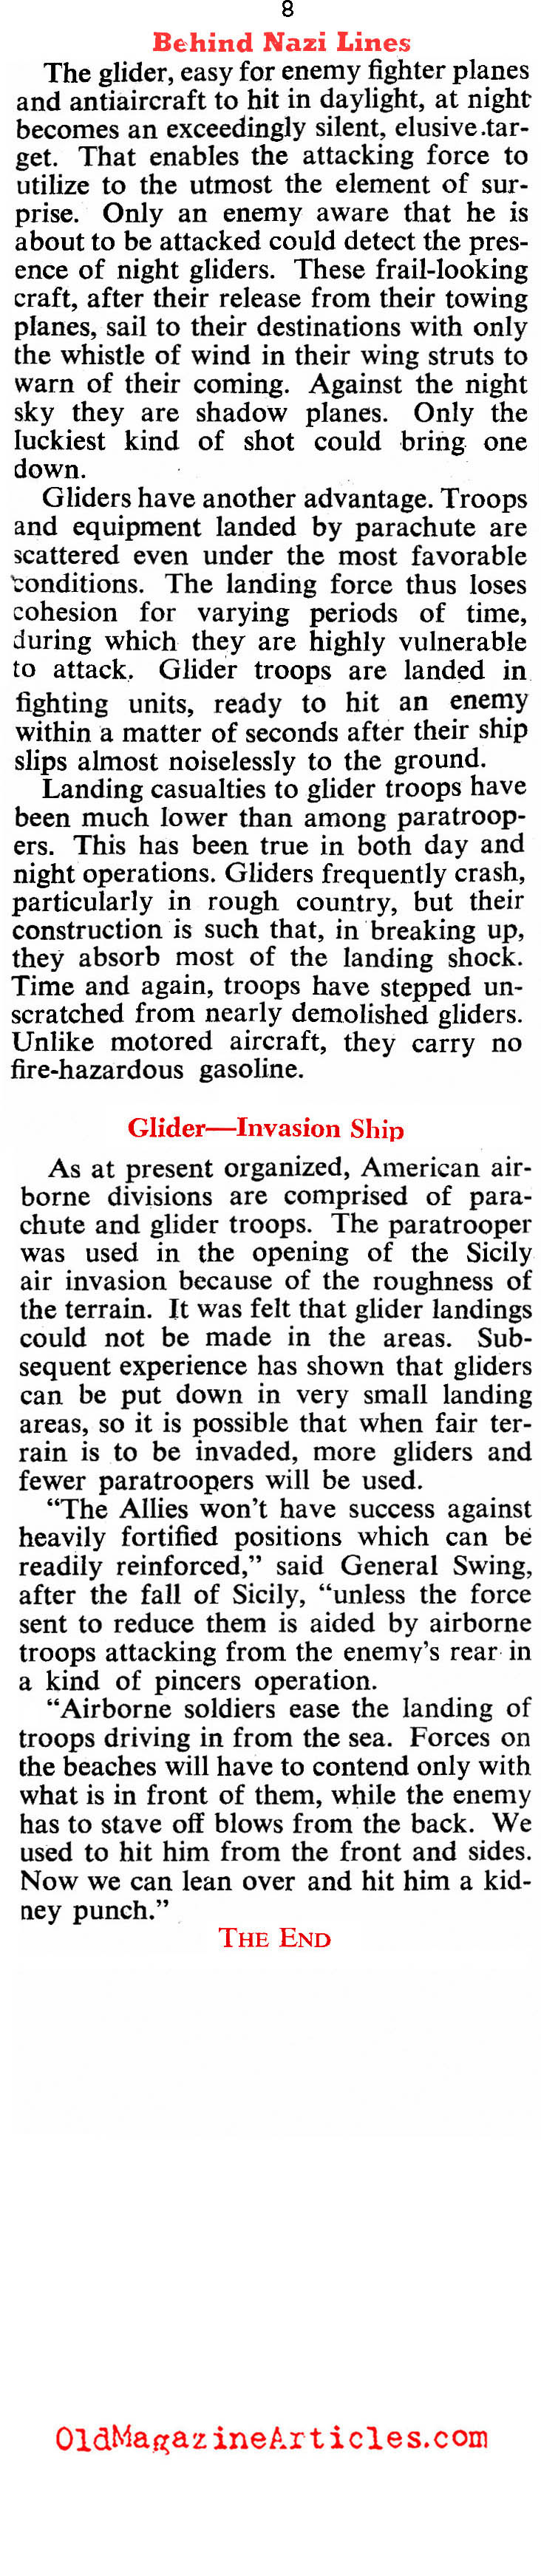 The 82nd Airborne in Sicily (Collier's Magazine, 1943)